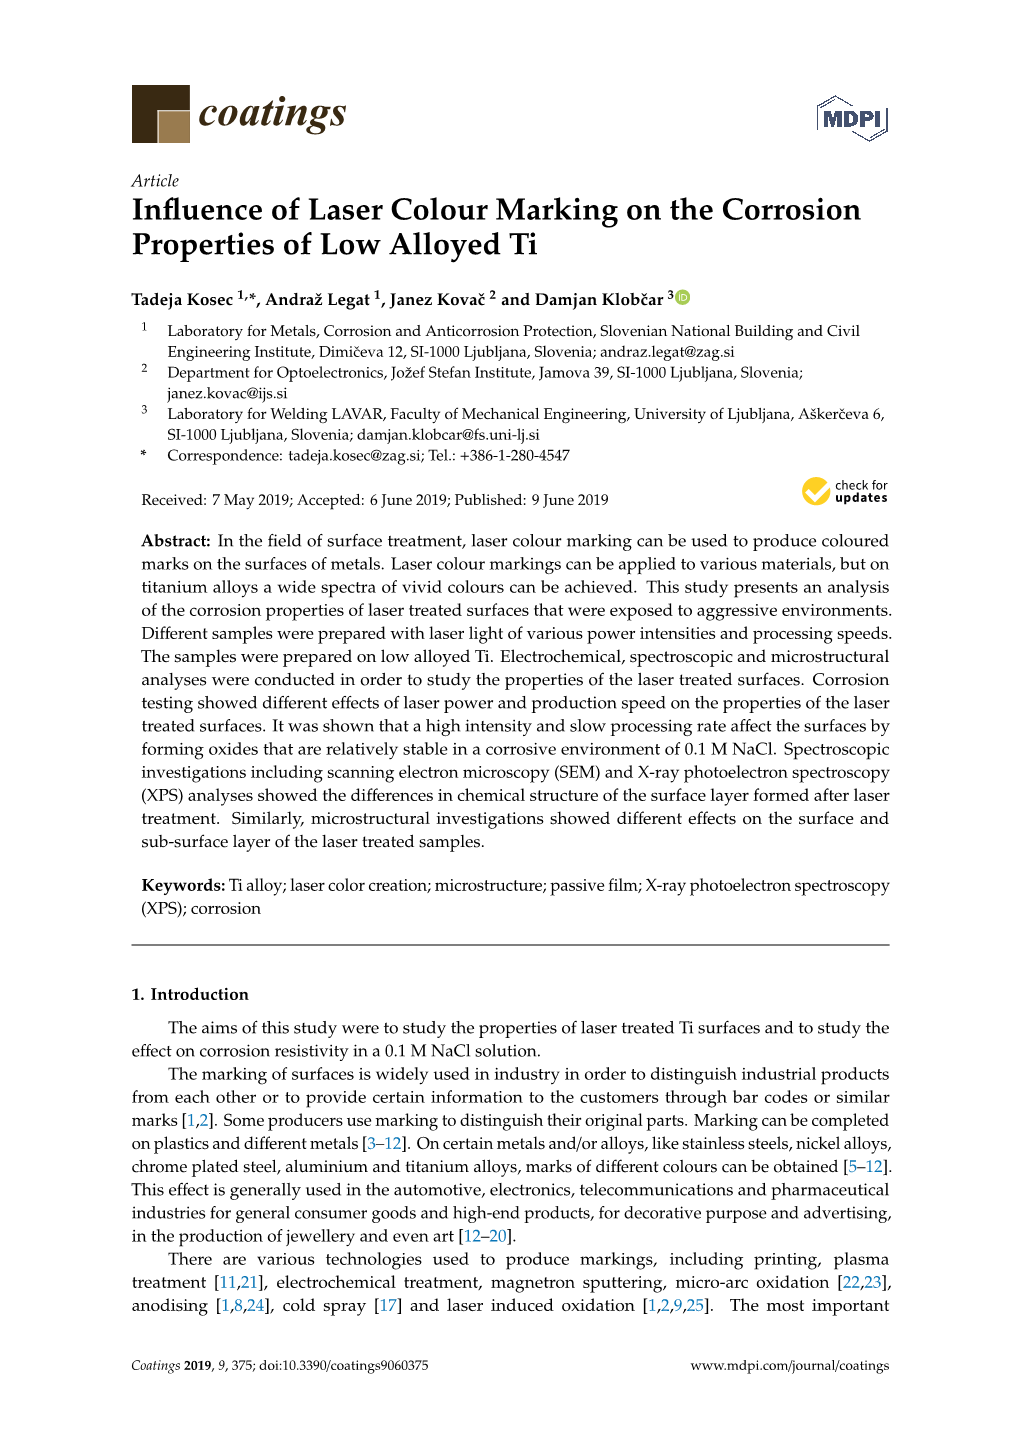 Influence of Laser Colour Marking on the Corrosion Properties of Low